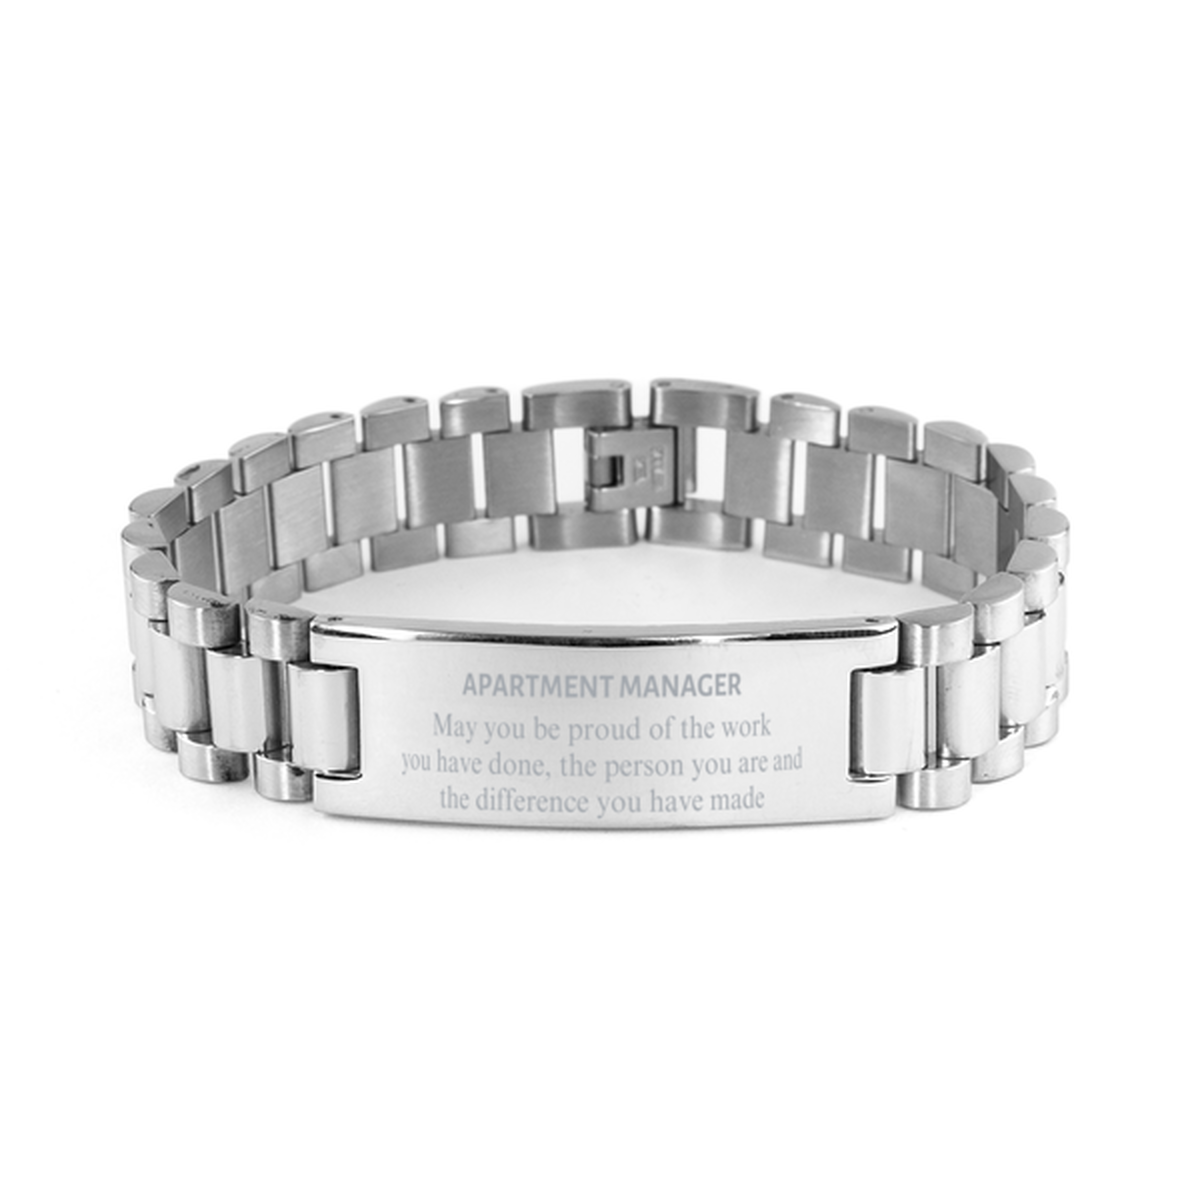 Apartment Manager May you be proud of the work you have done, Retirement Apartment Manager Ladder Stainless Steel Bracelet for Colleague Appreciation Gifts Amazing for Apartment Manager